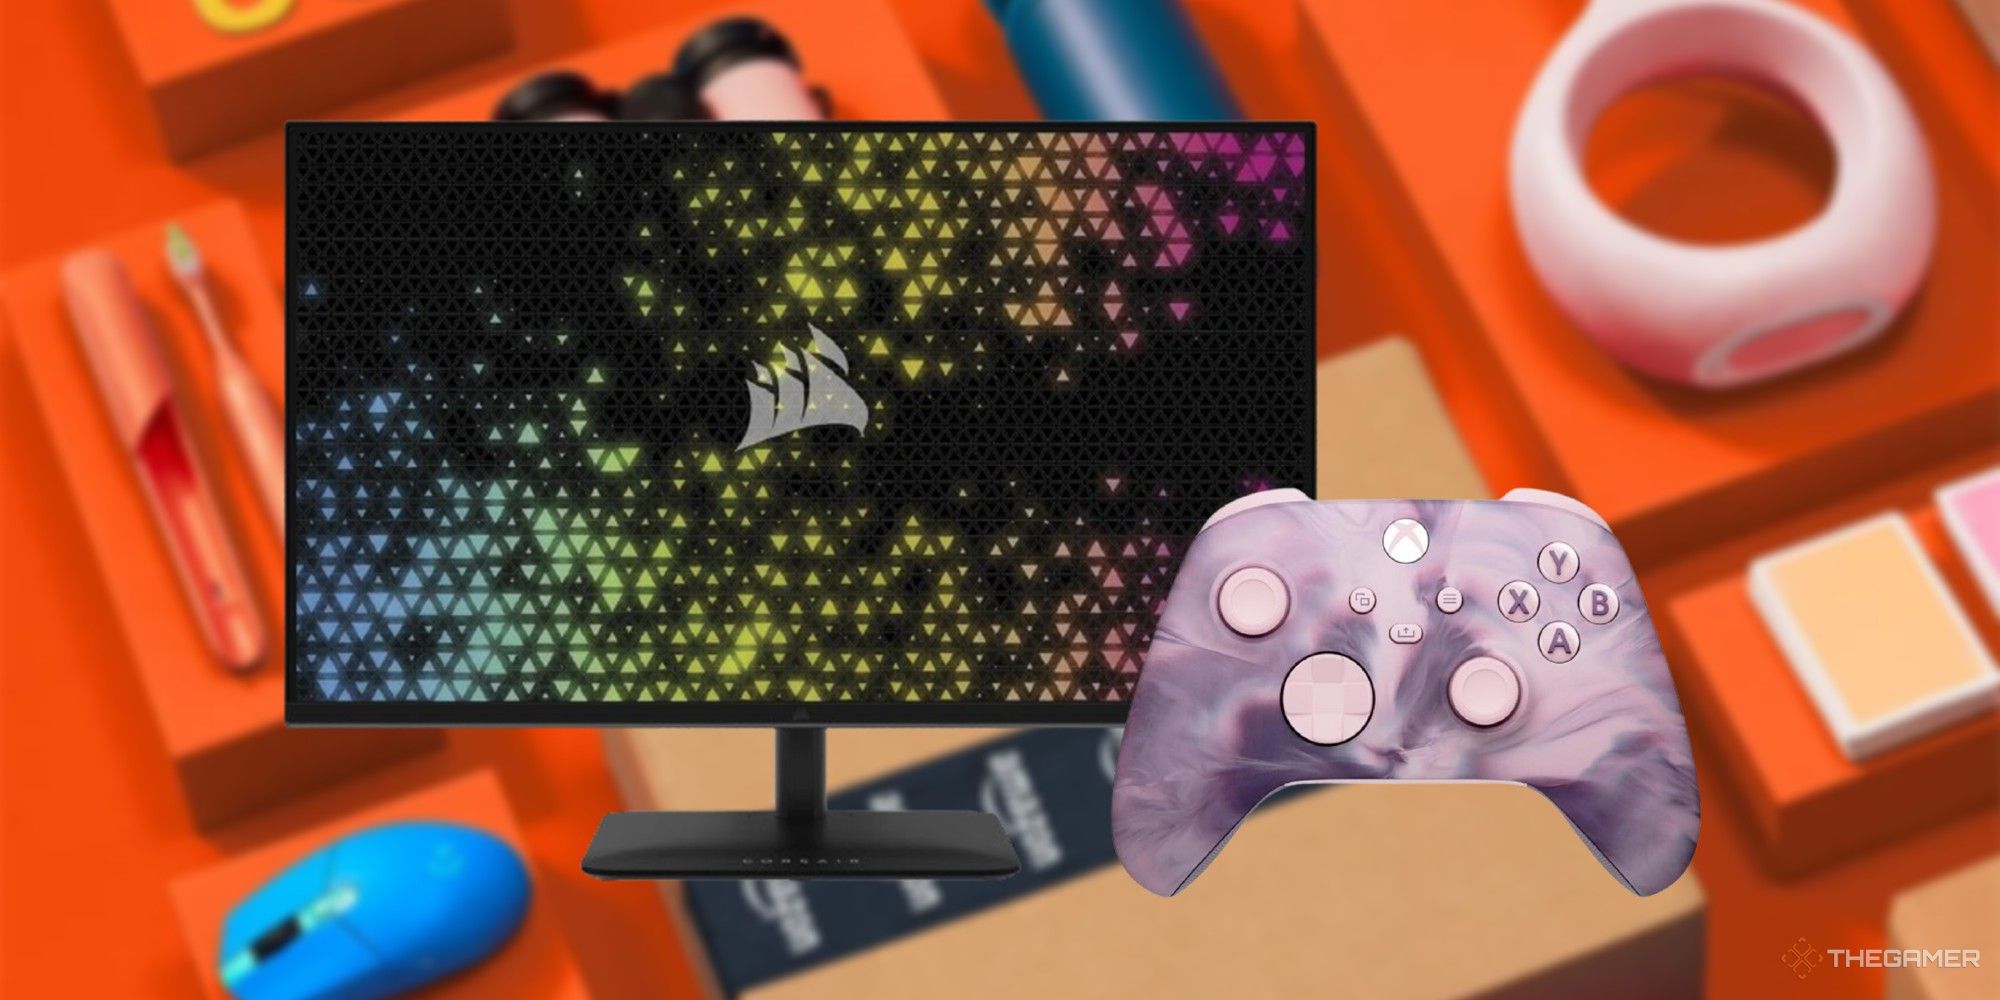 monitor and xbox controller on an amazon big spring sale background